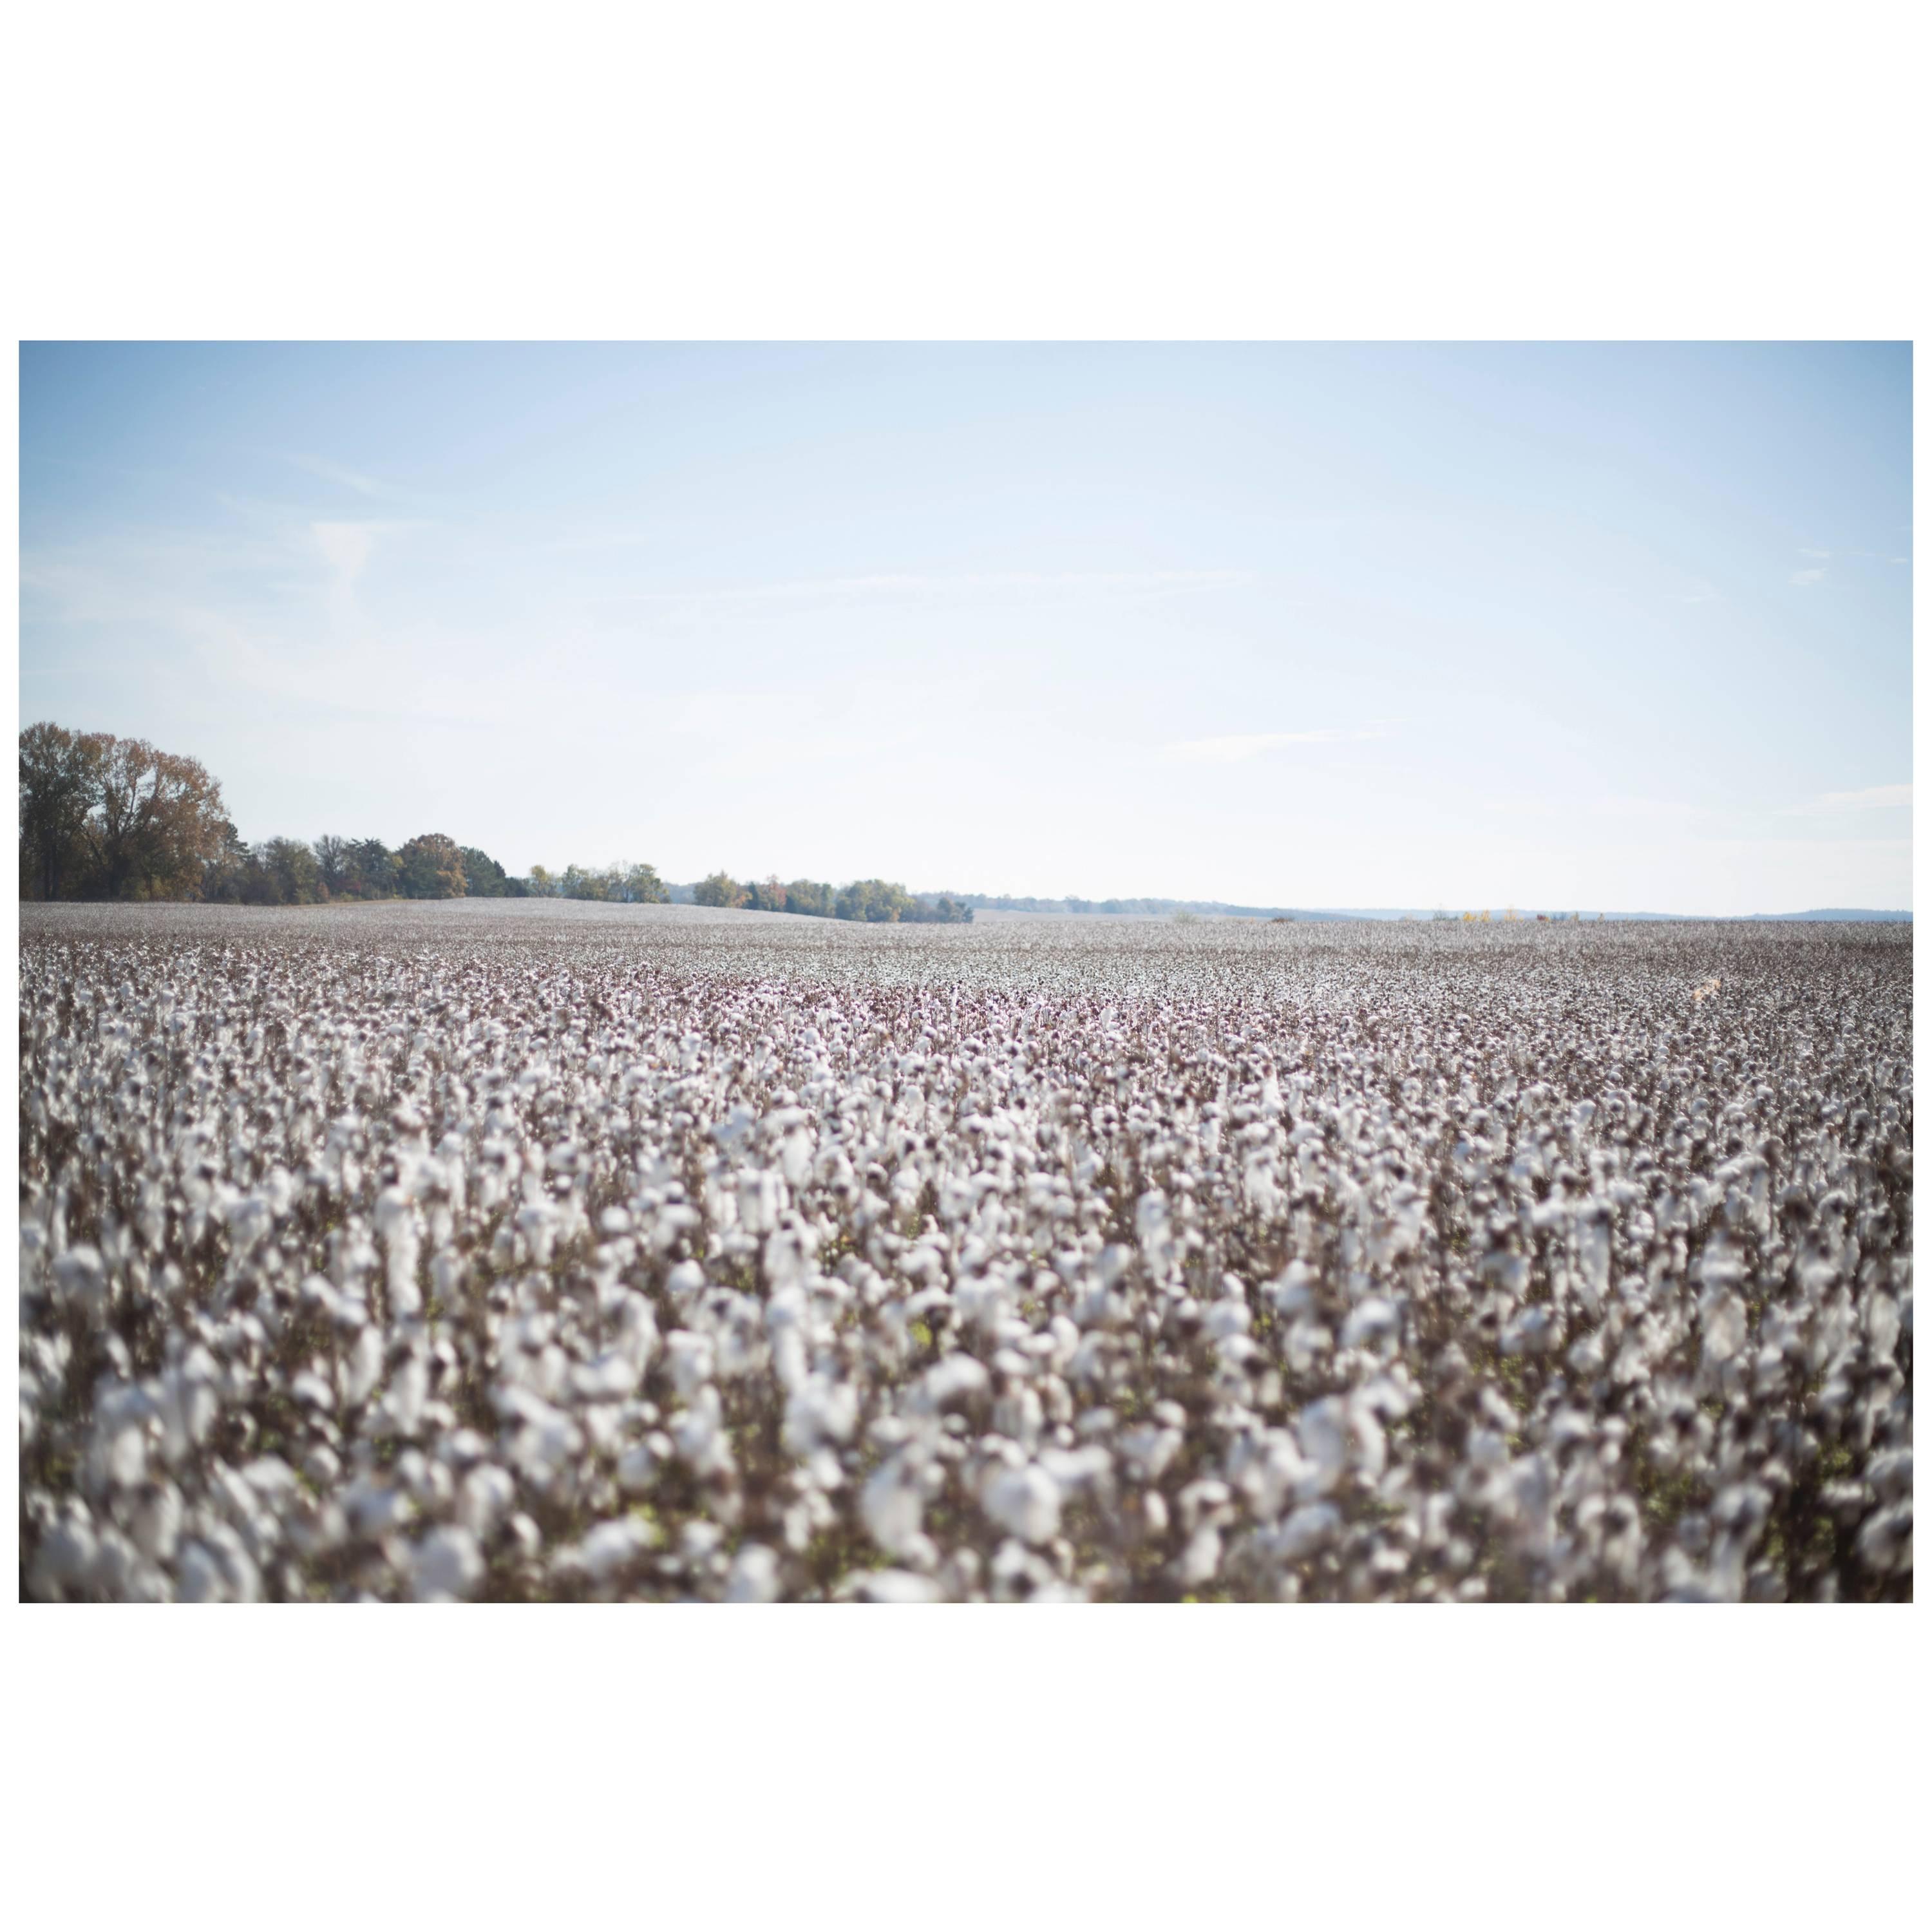 Large Format, Framed Rinne Allen Photograph "Field of Cotton" For Sale